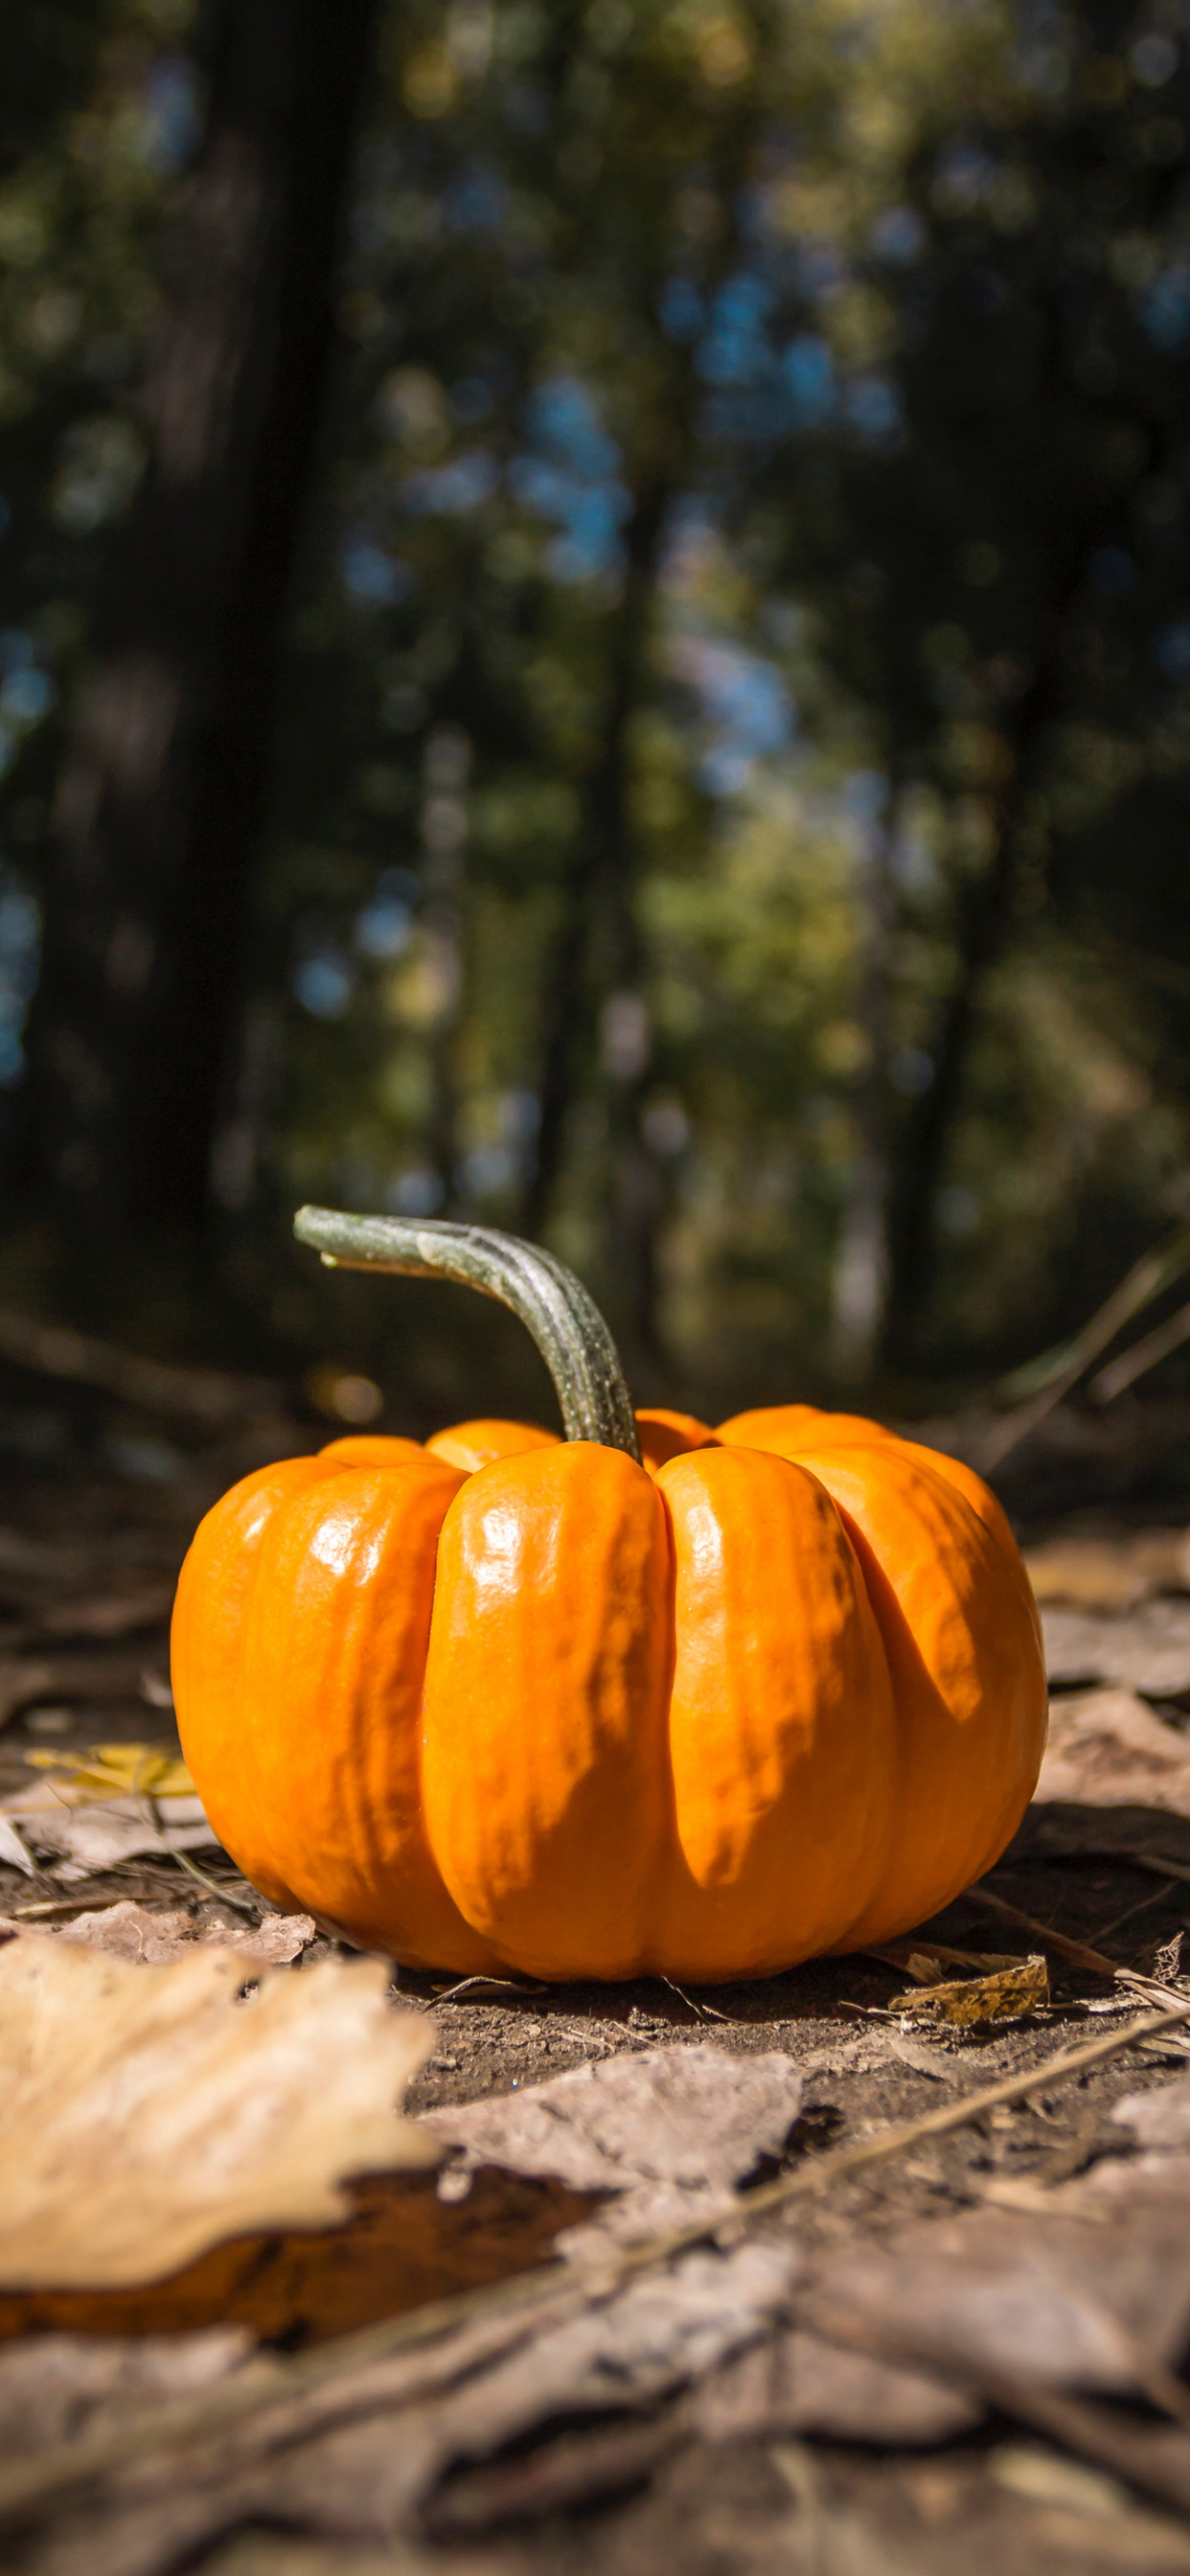 1242x2688 Pumpkin wallpapers for iPhone: download them now